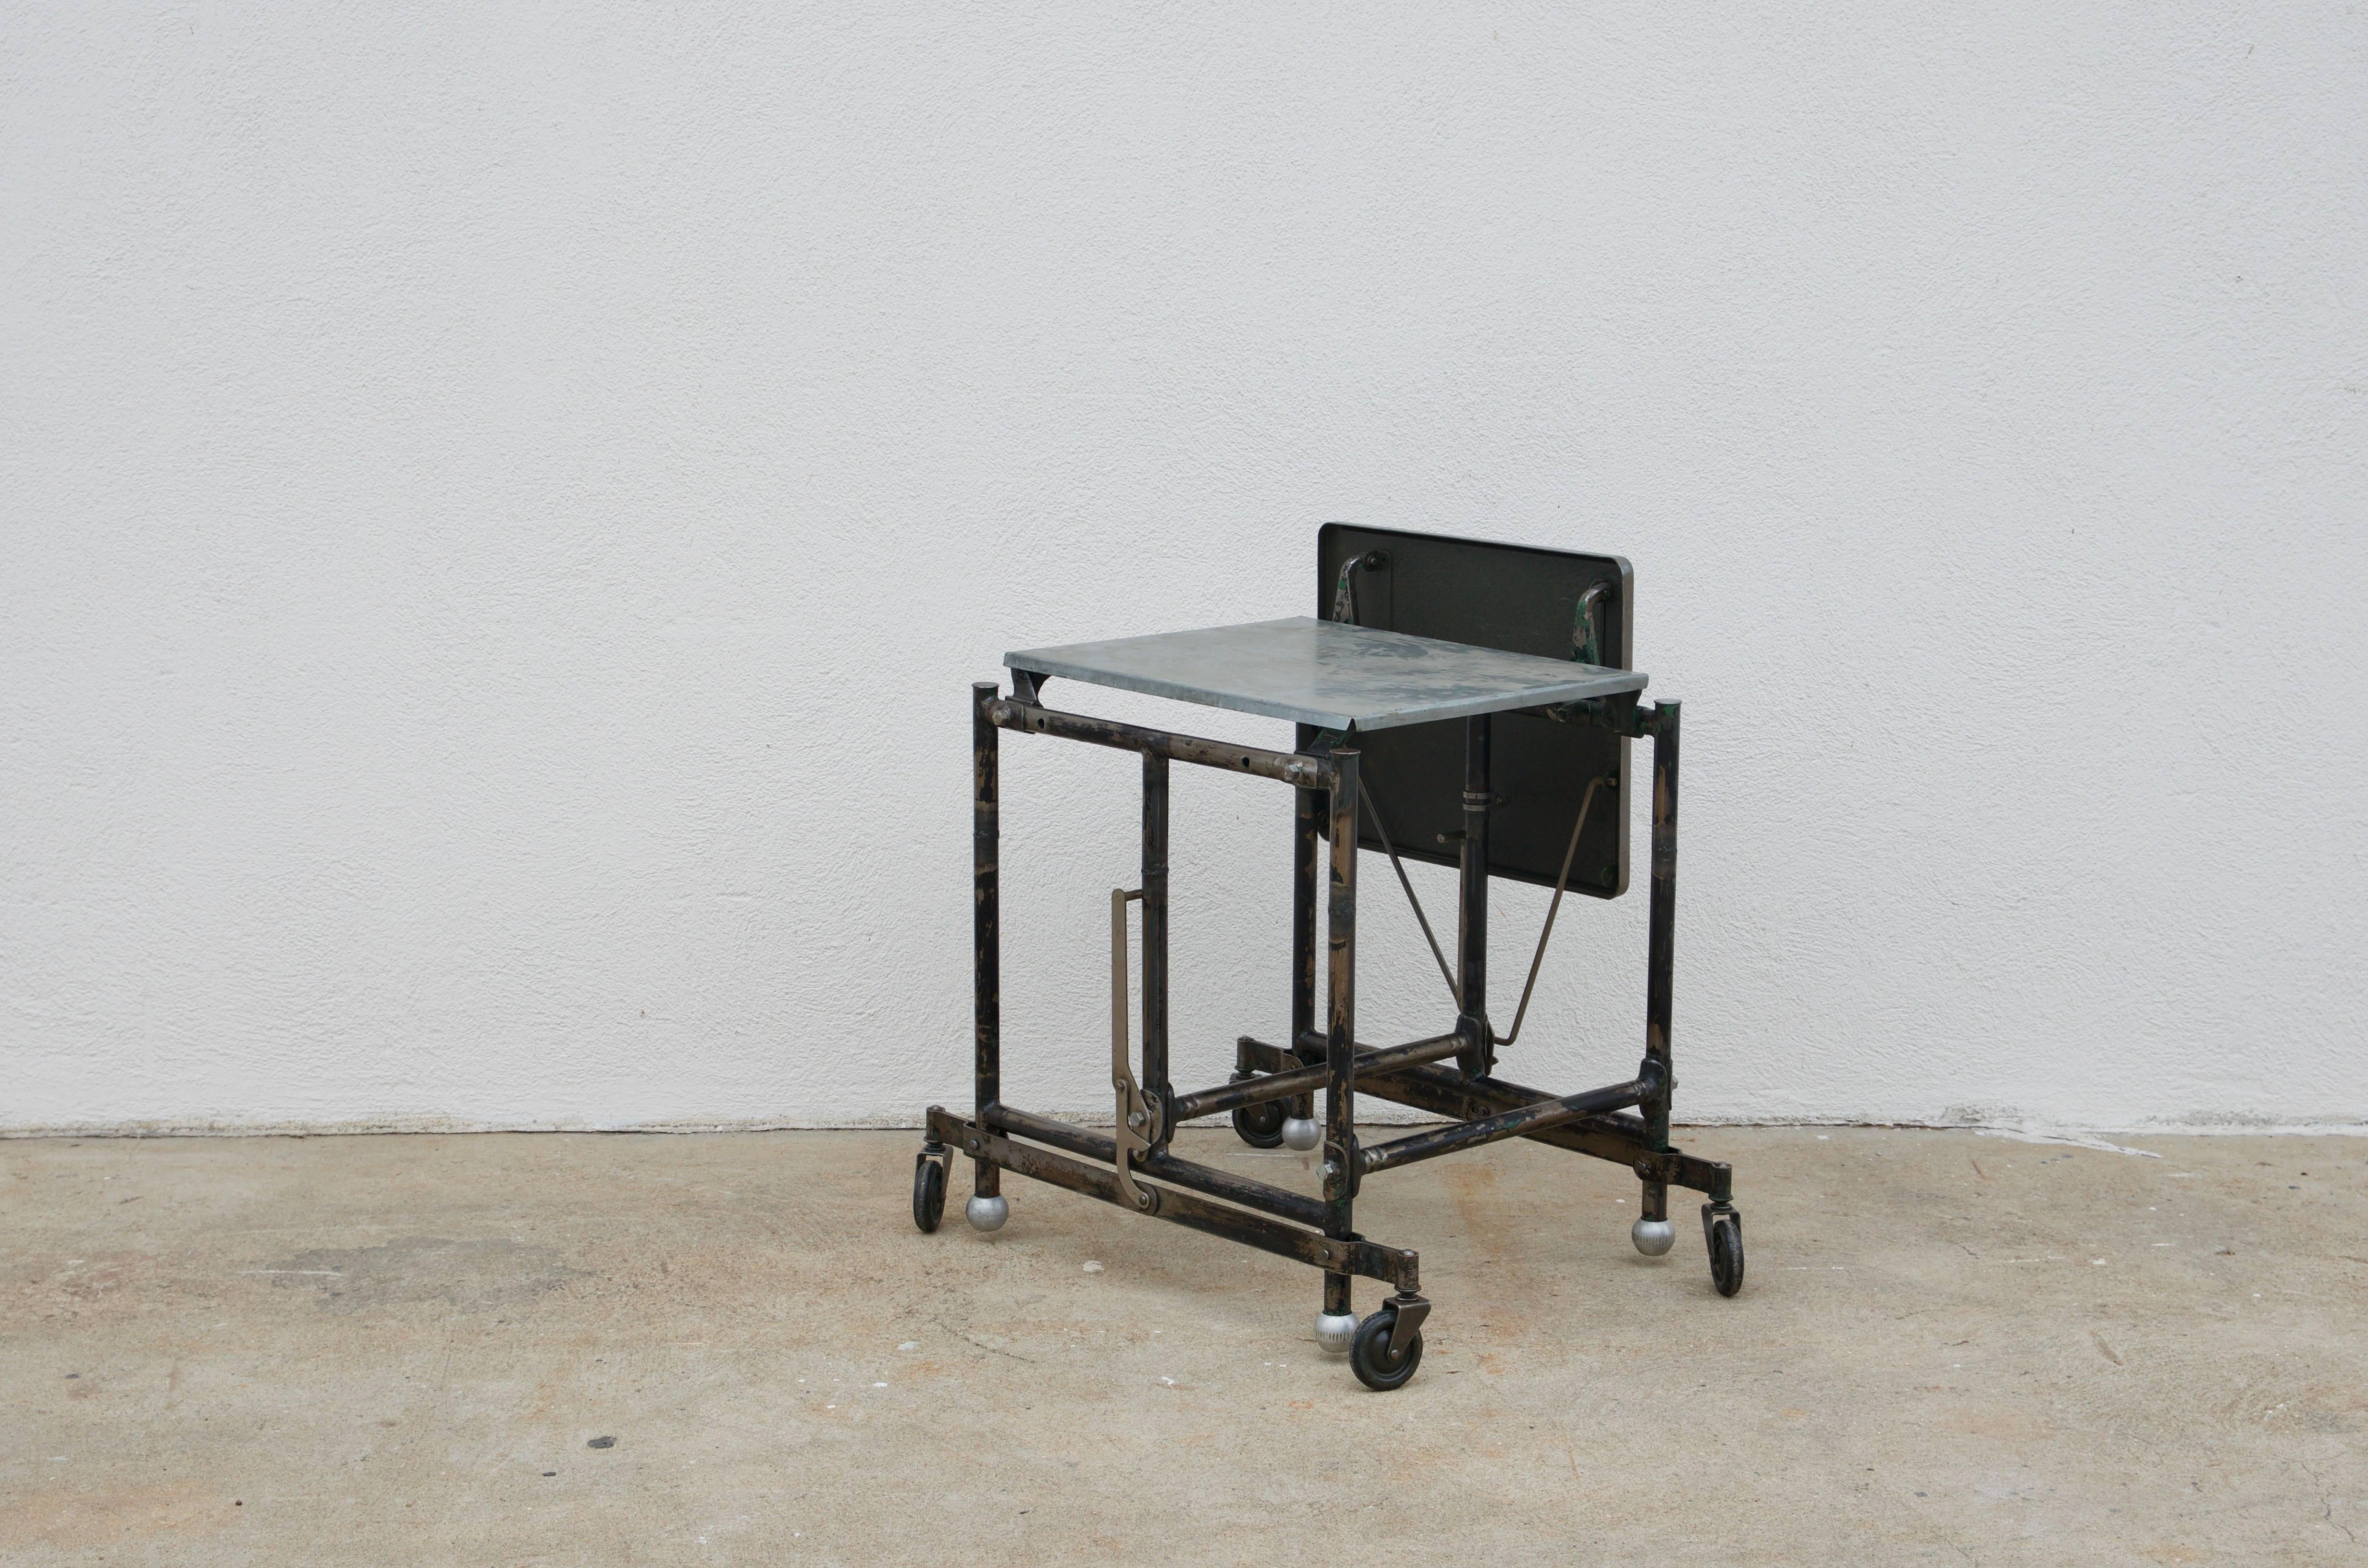 Patinated steel and zinc Industrial rolling side table. Formerly a typewriter stand; great as an Industrial side table or nightstand. Great patina. Fully functional.